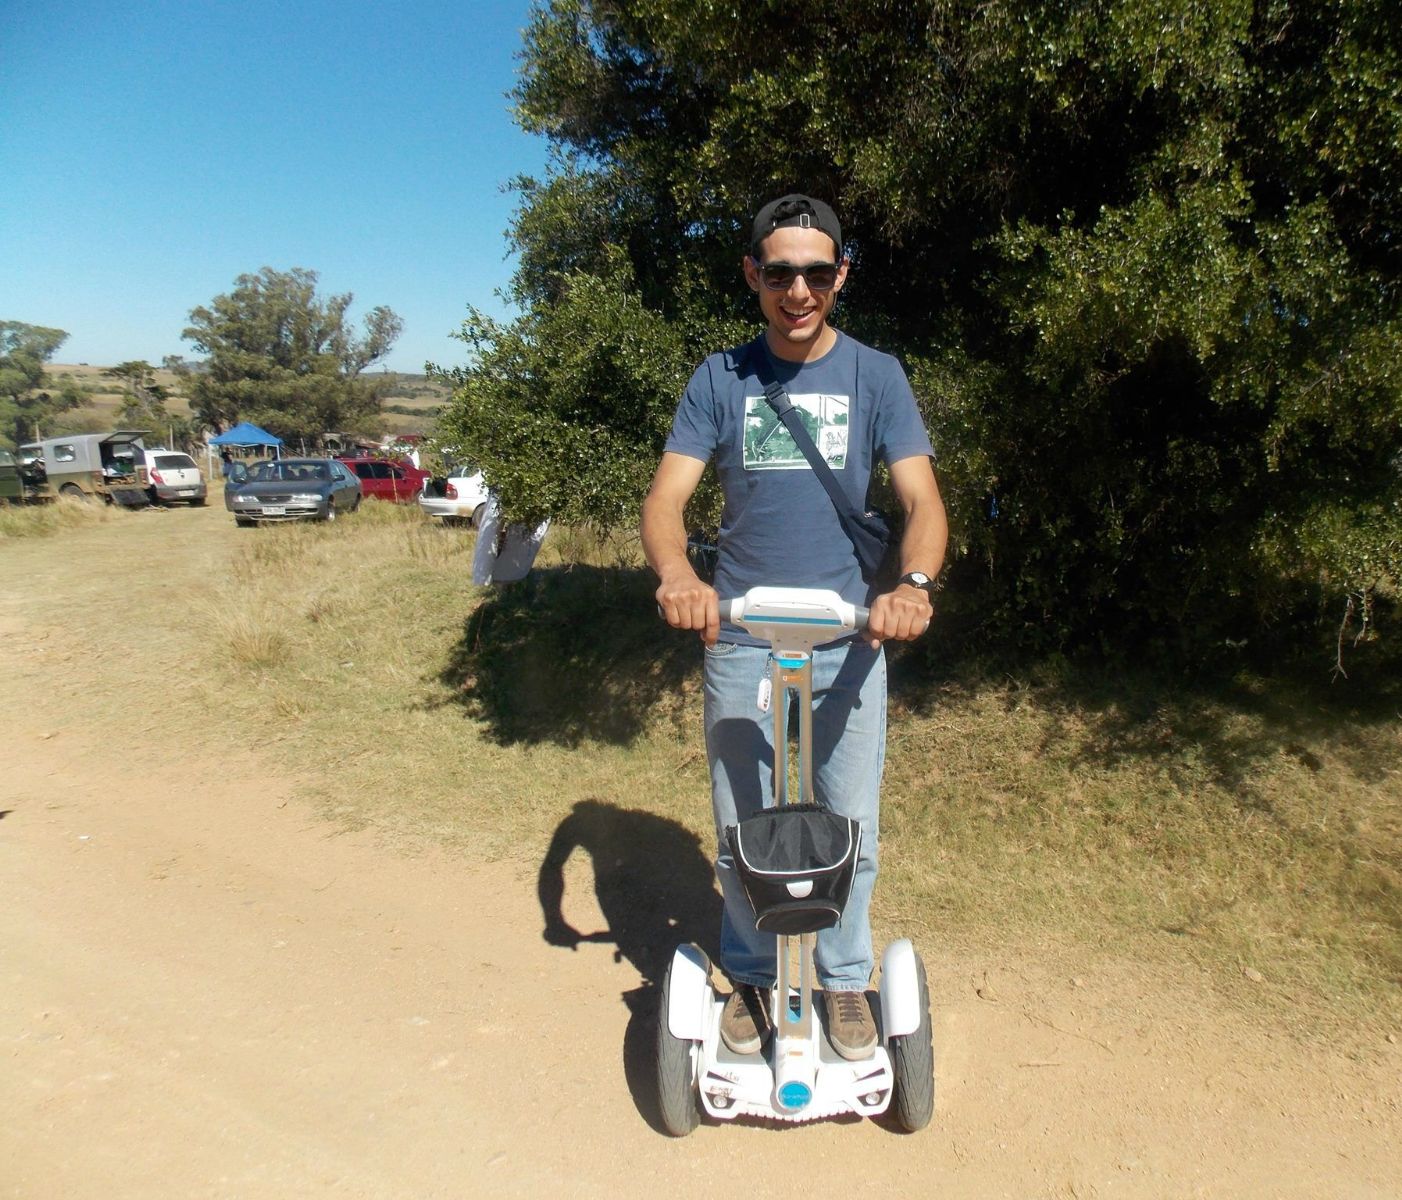 Airwheel Electric Unicycle Represent its Master of Hi-tech.